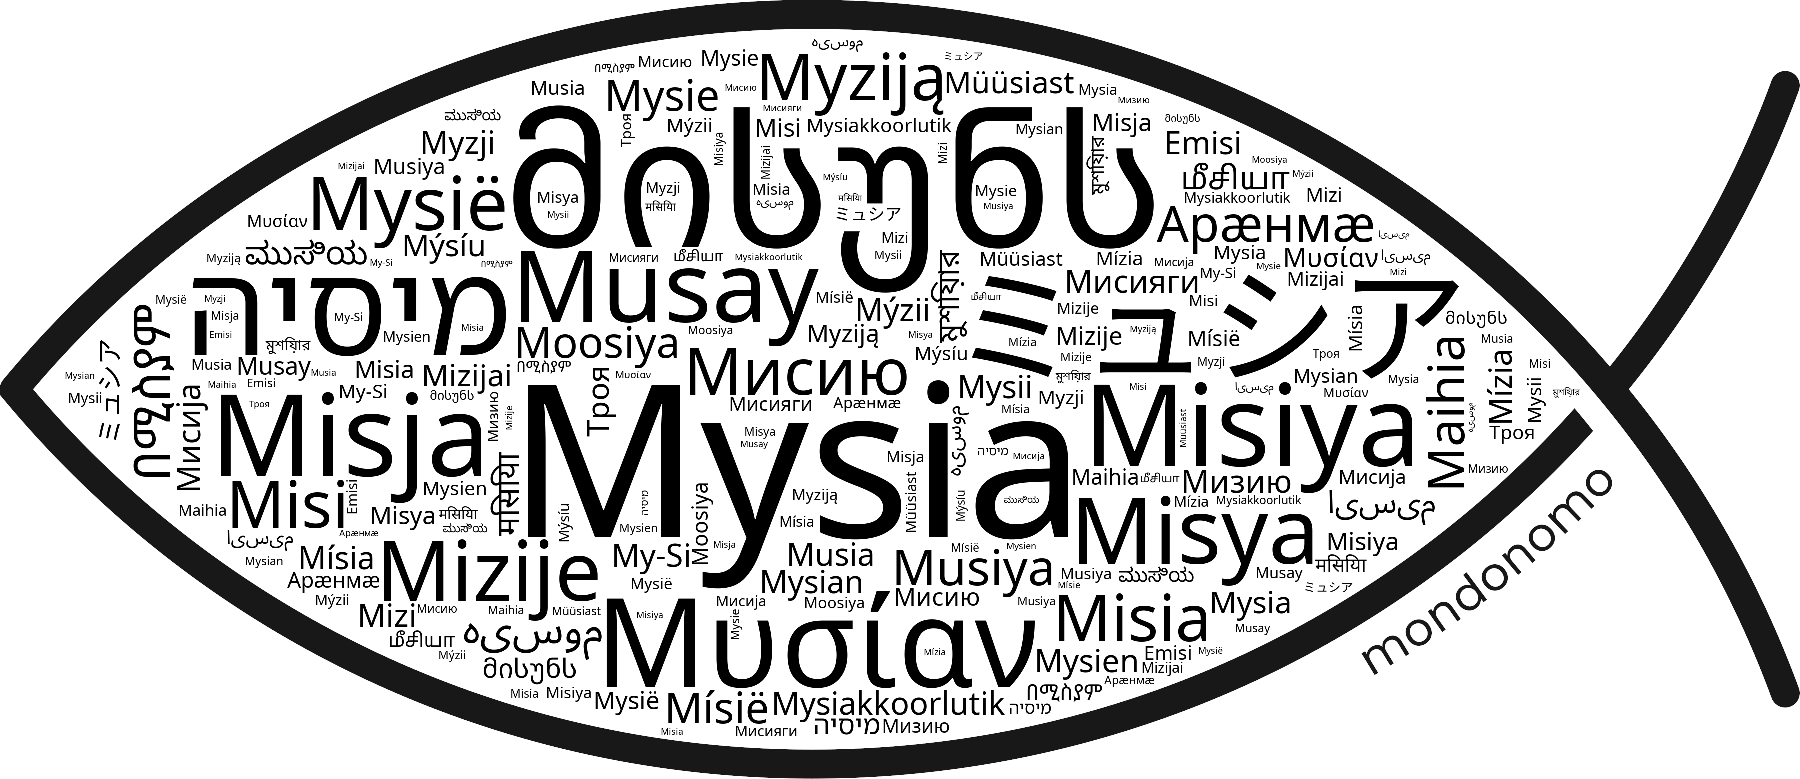 Name Mysia in the world's Bibles